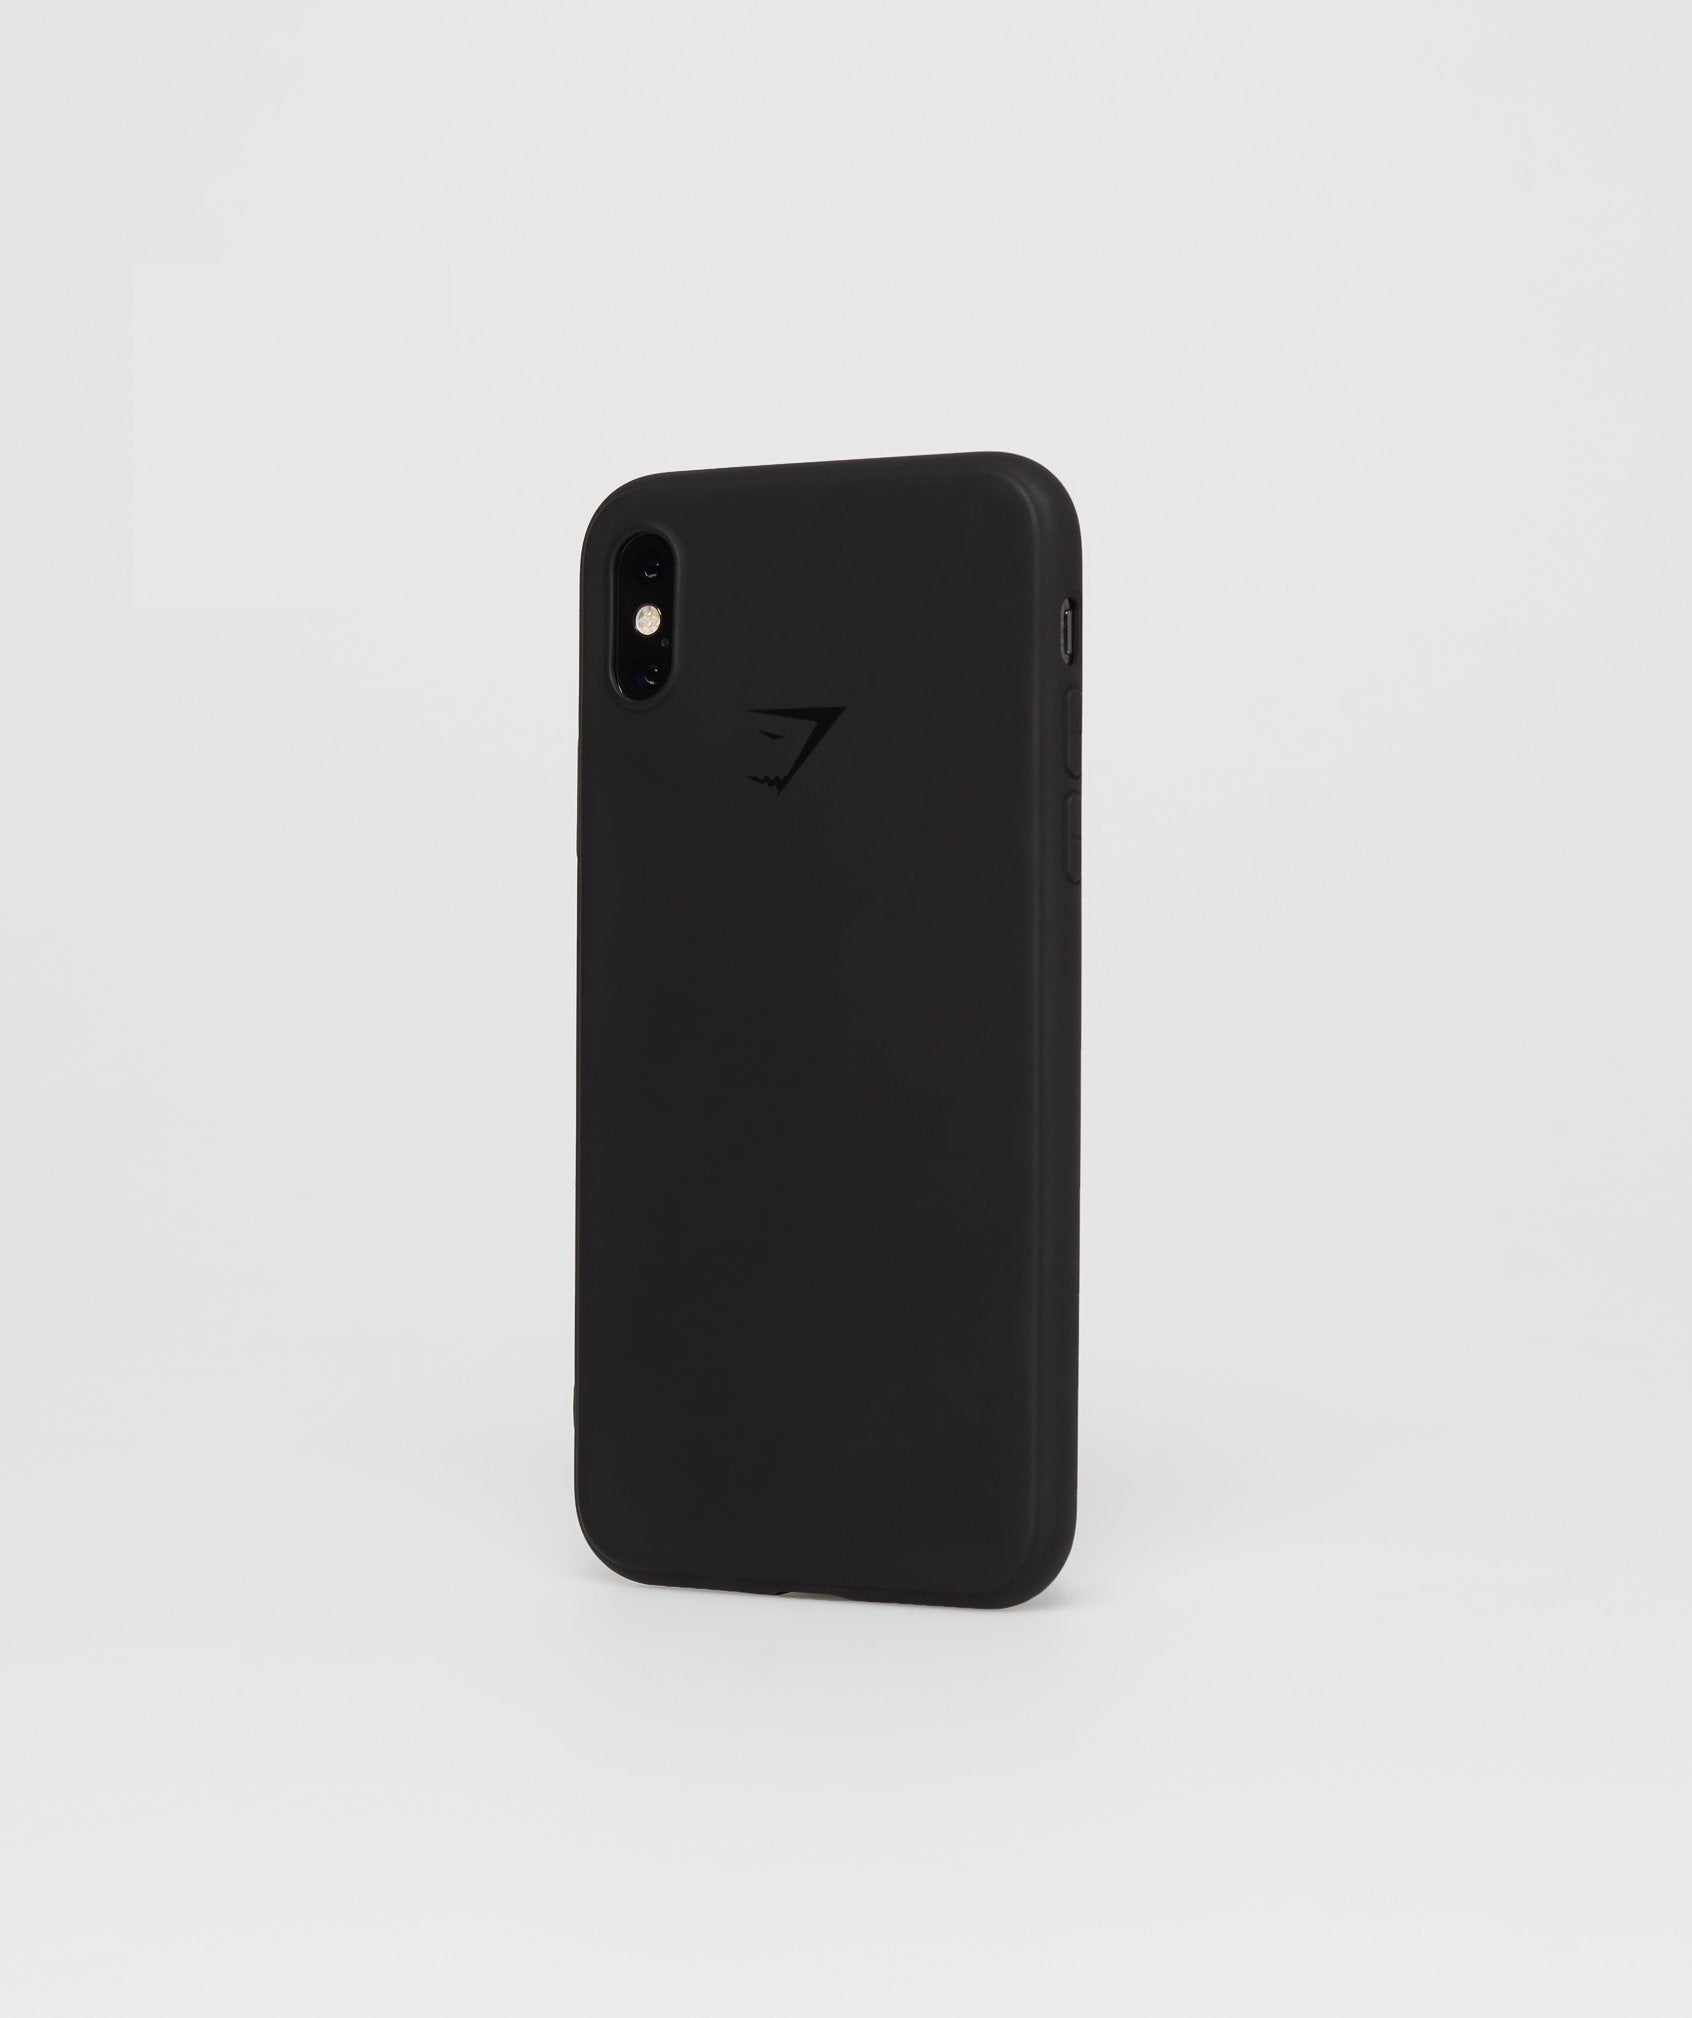 iPhone X Case in Black - view 1